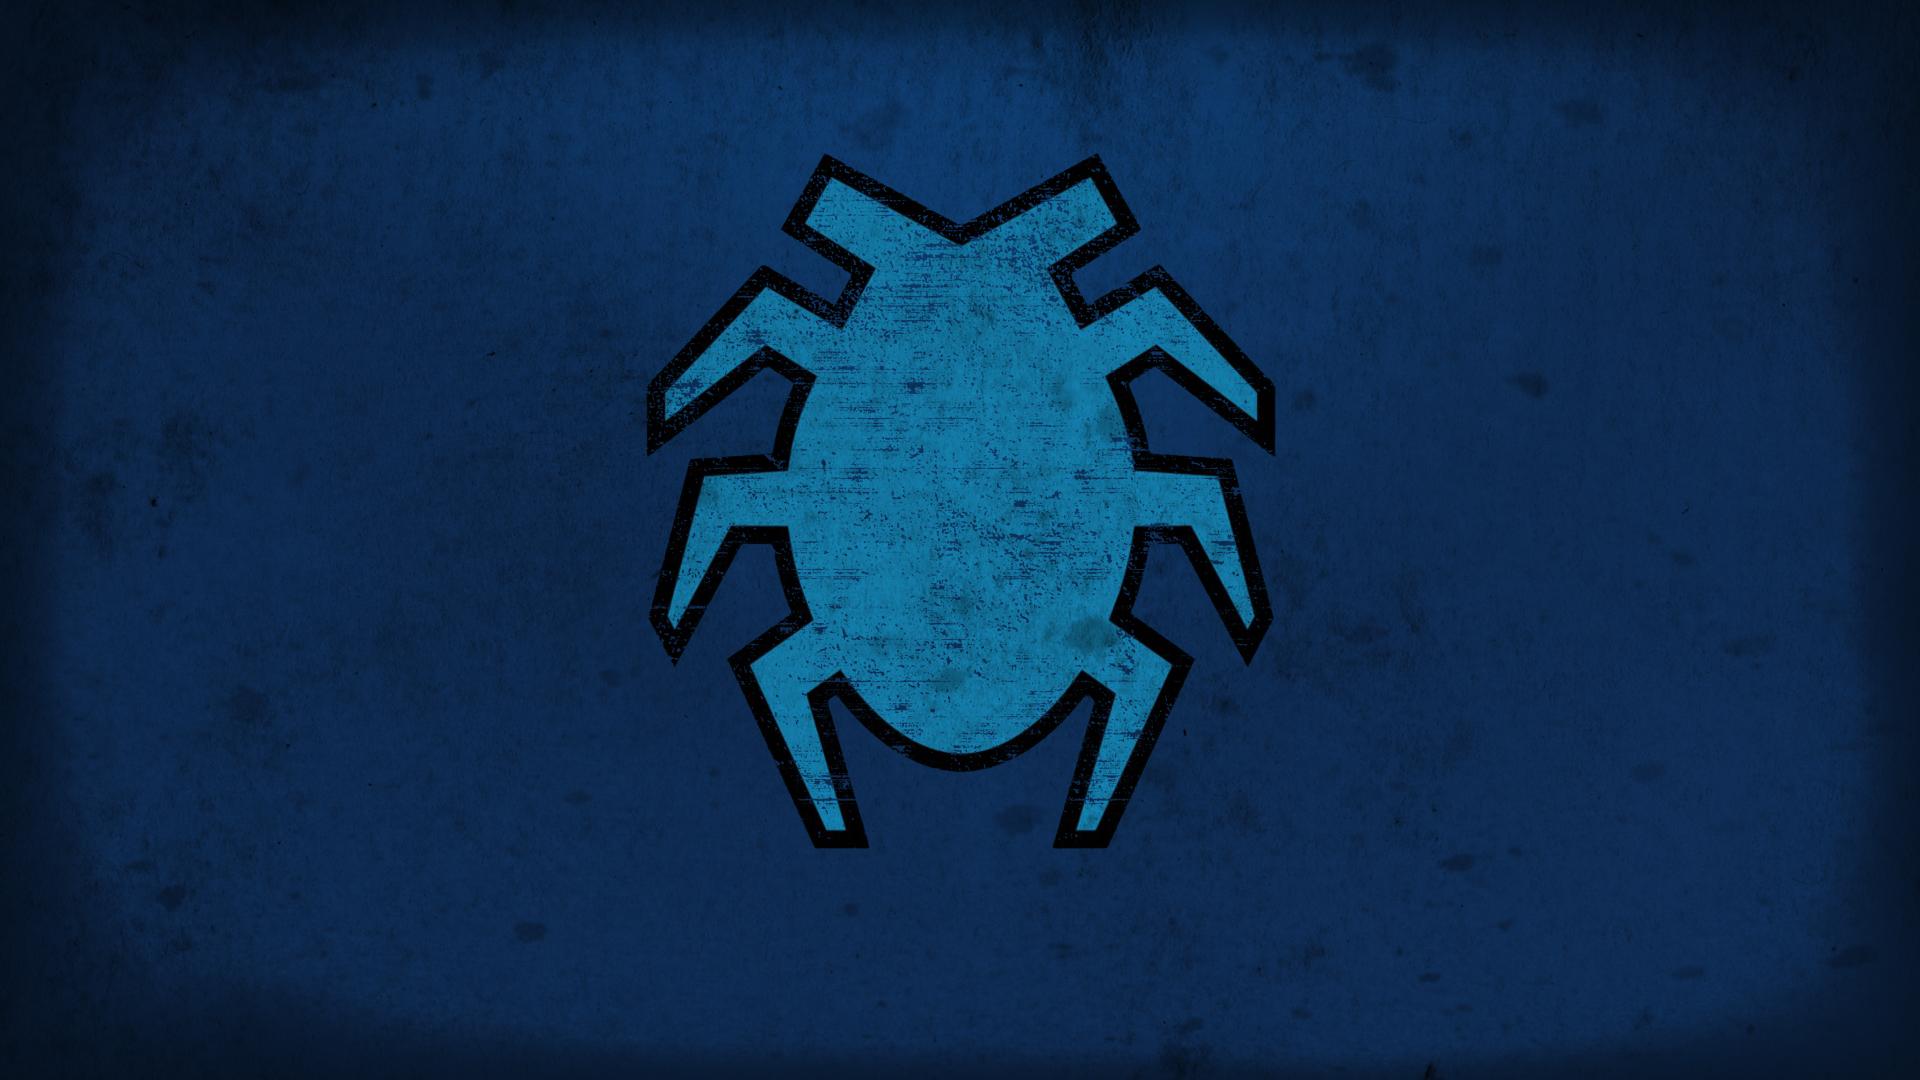 Awesome OC Blue Beetle wallpaper from /r/Comicwalls : BlueBeetle